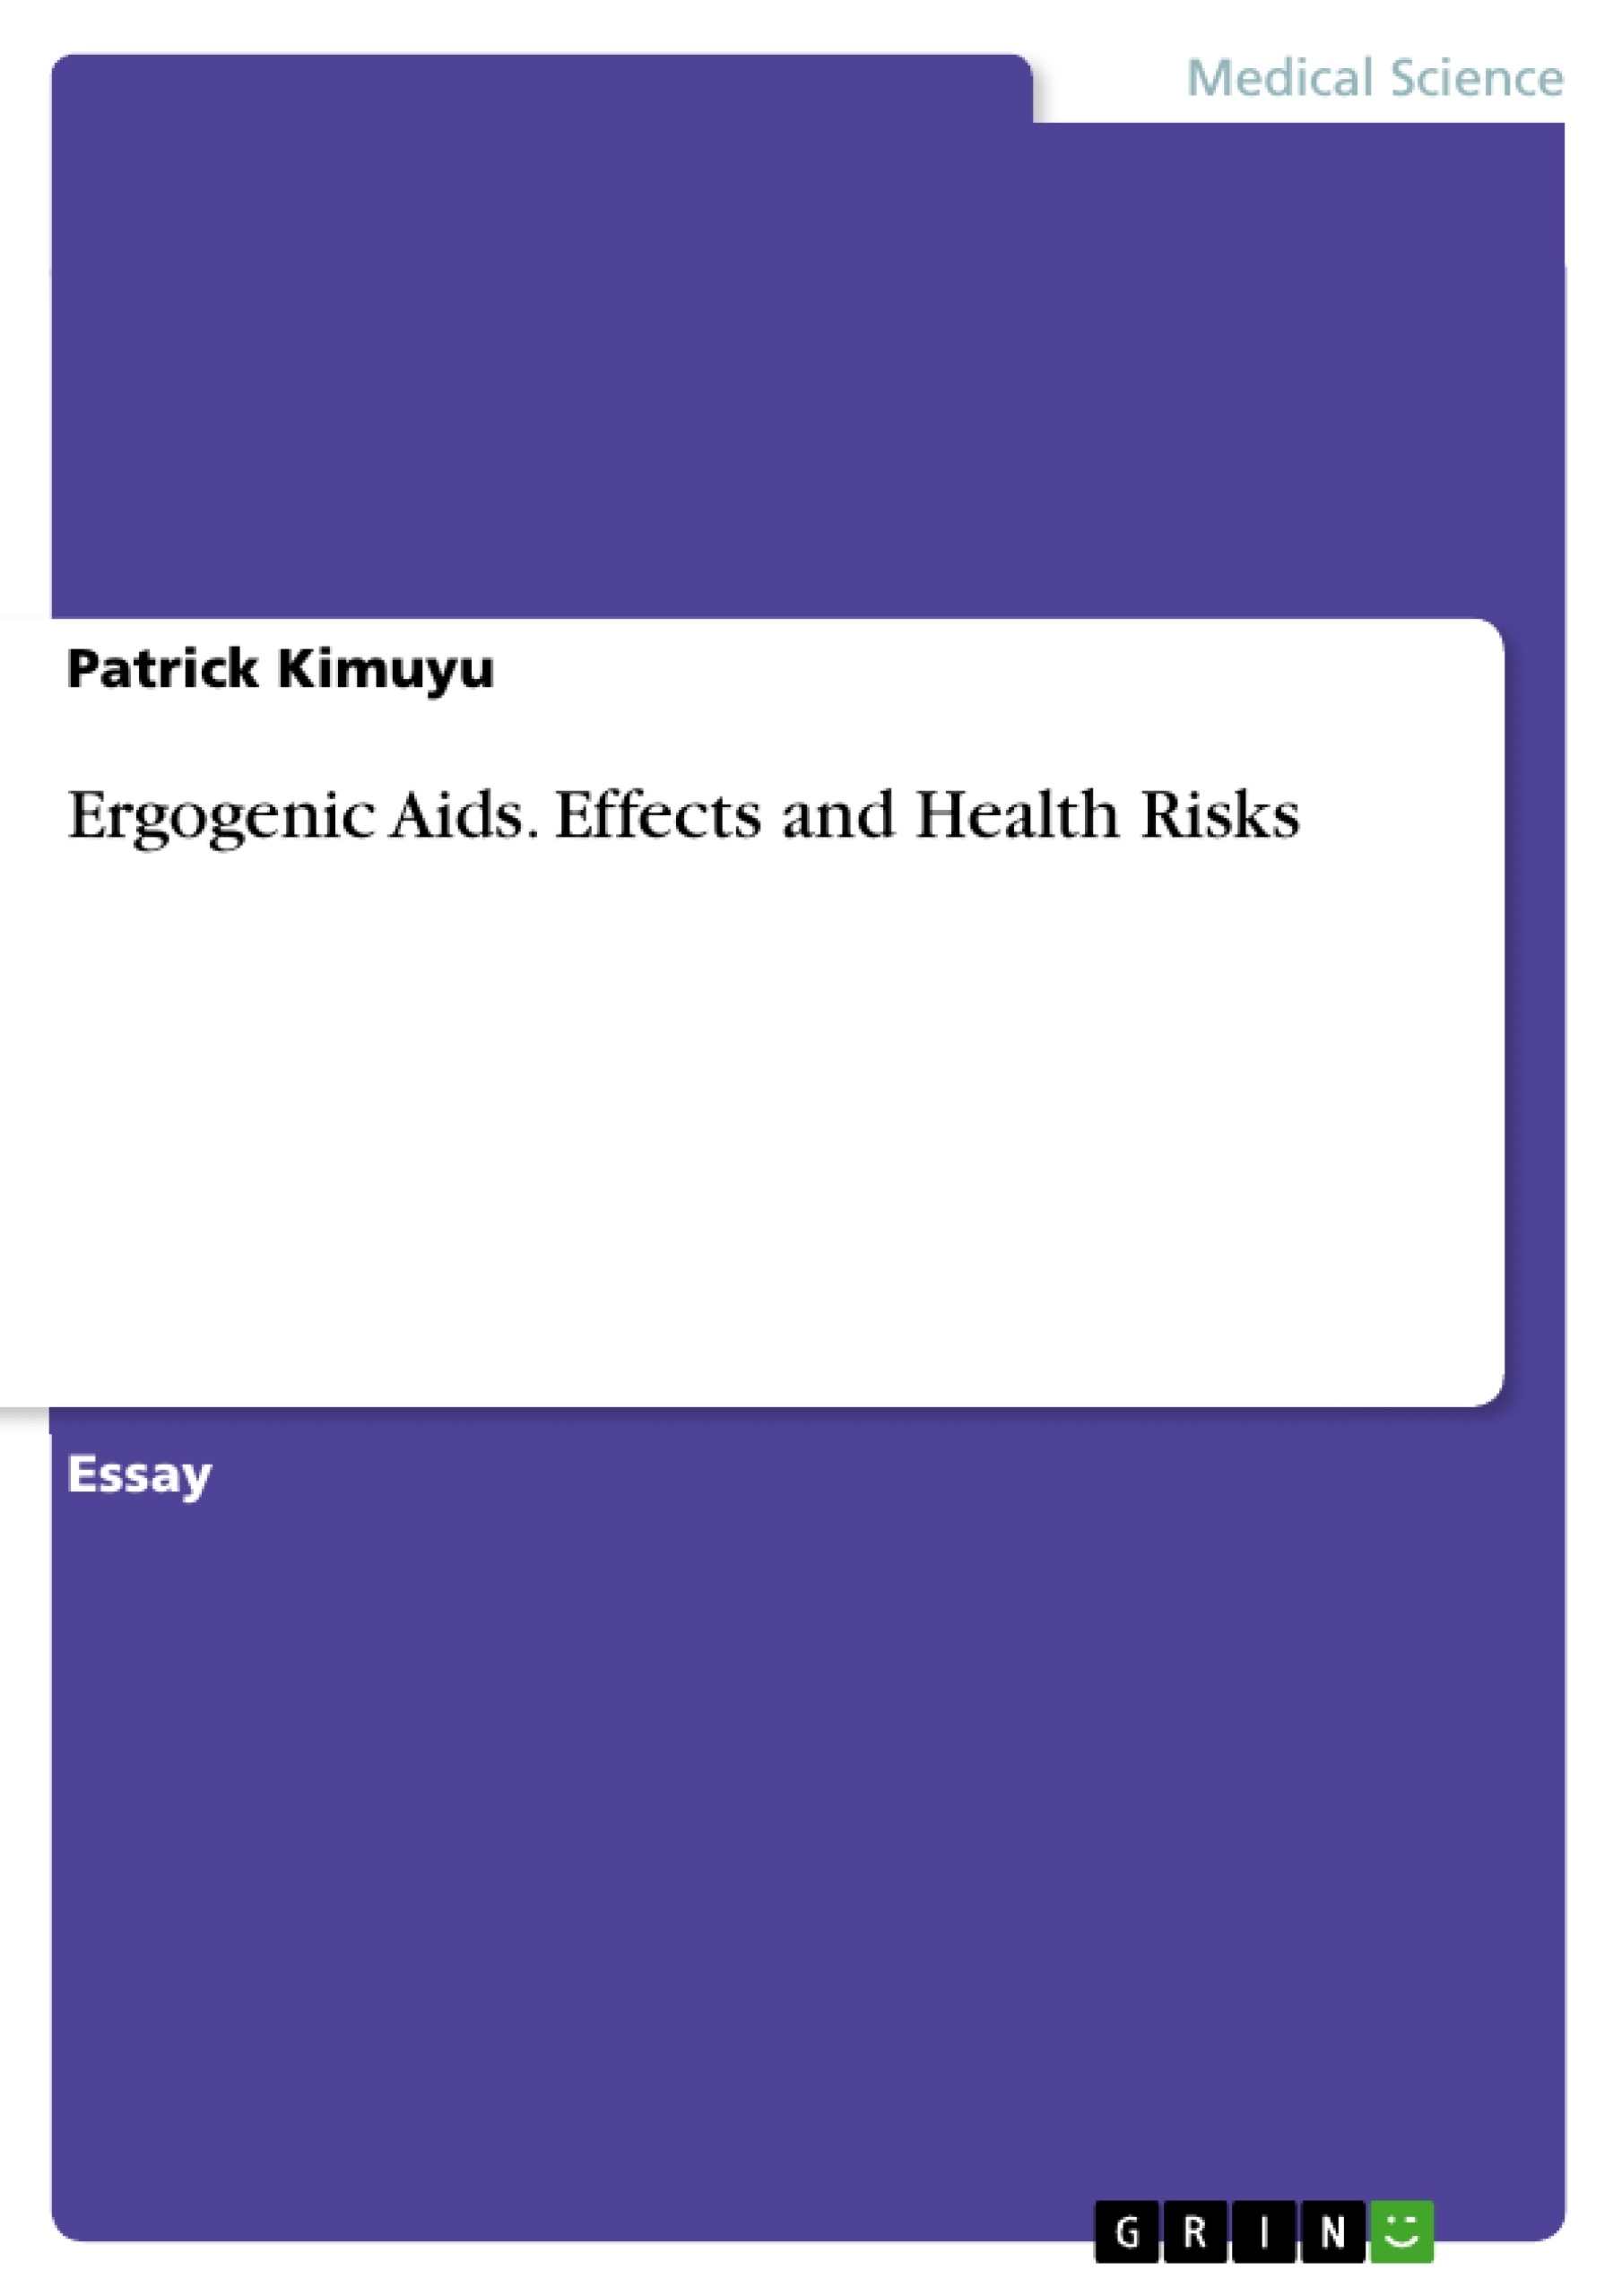 Titre: Ergogenic Aids. Effects and Health Risks